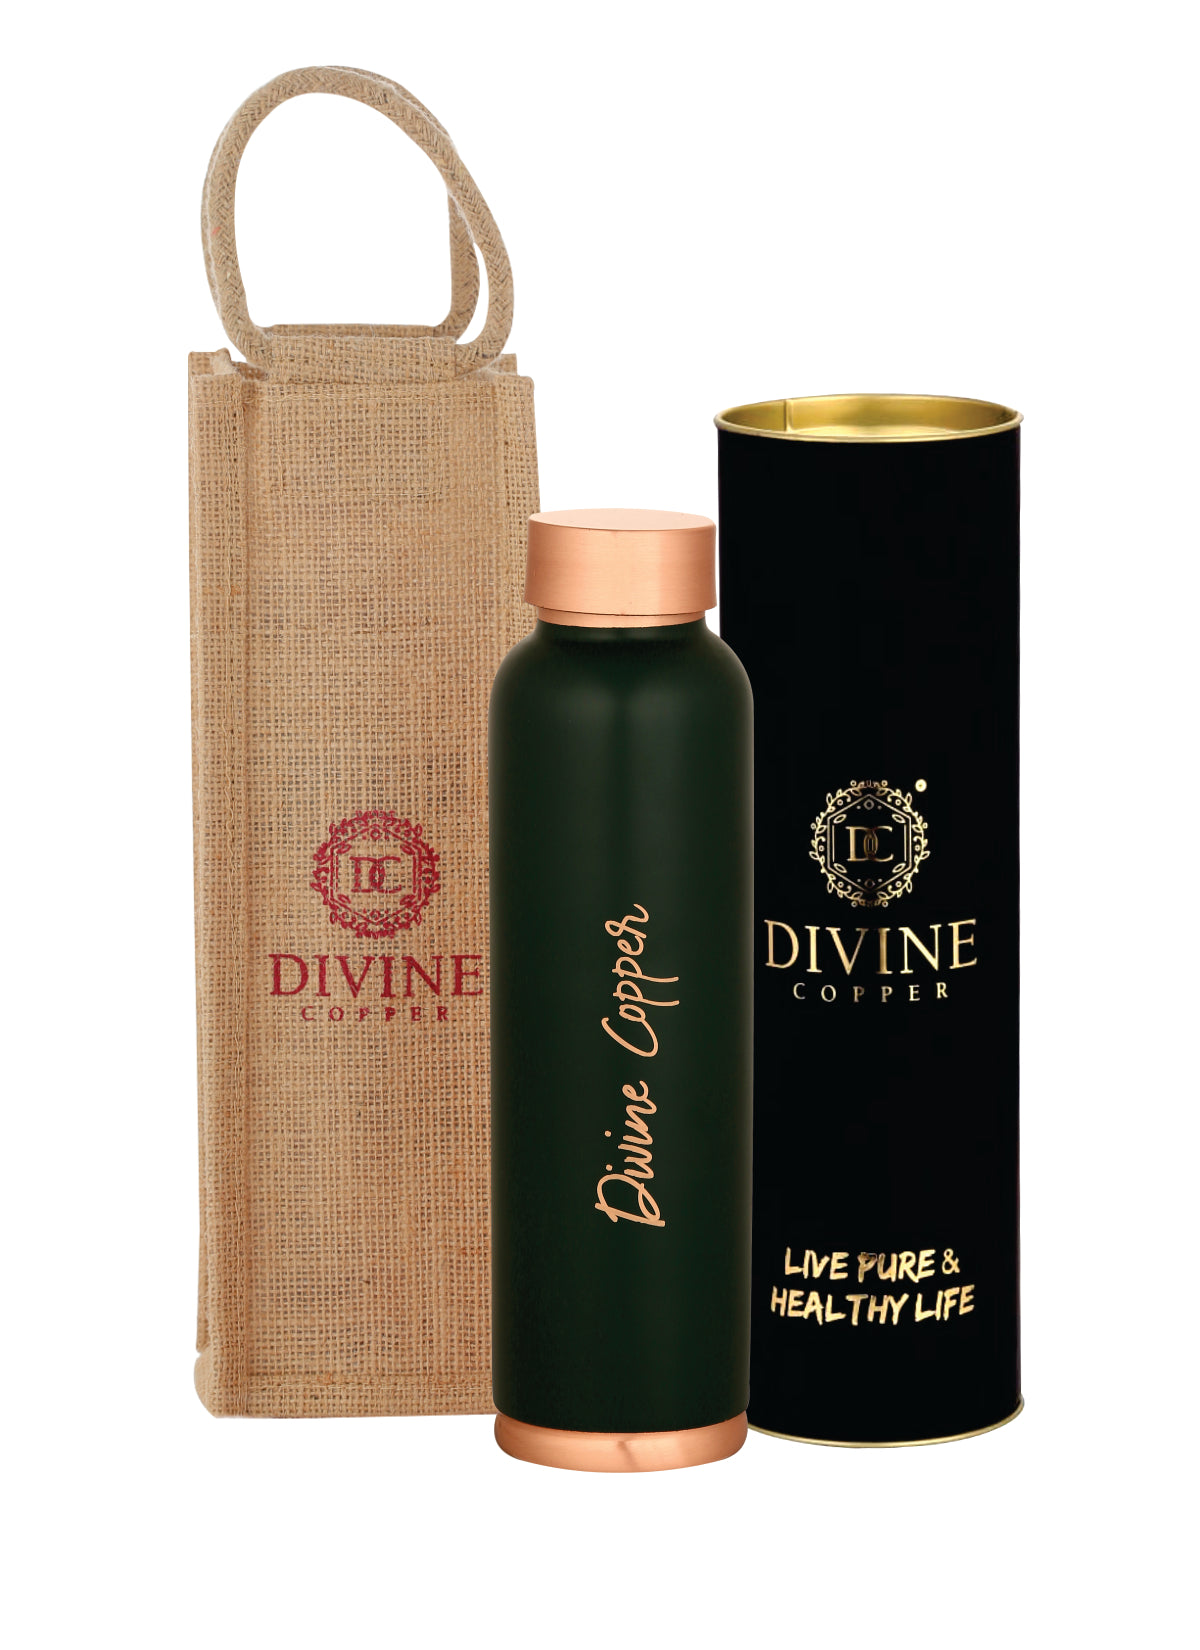 Oreo green Copper bottle with free Jute carry bag